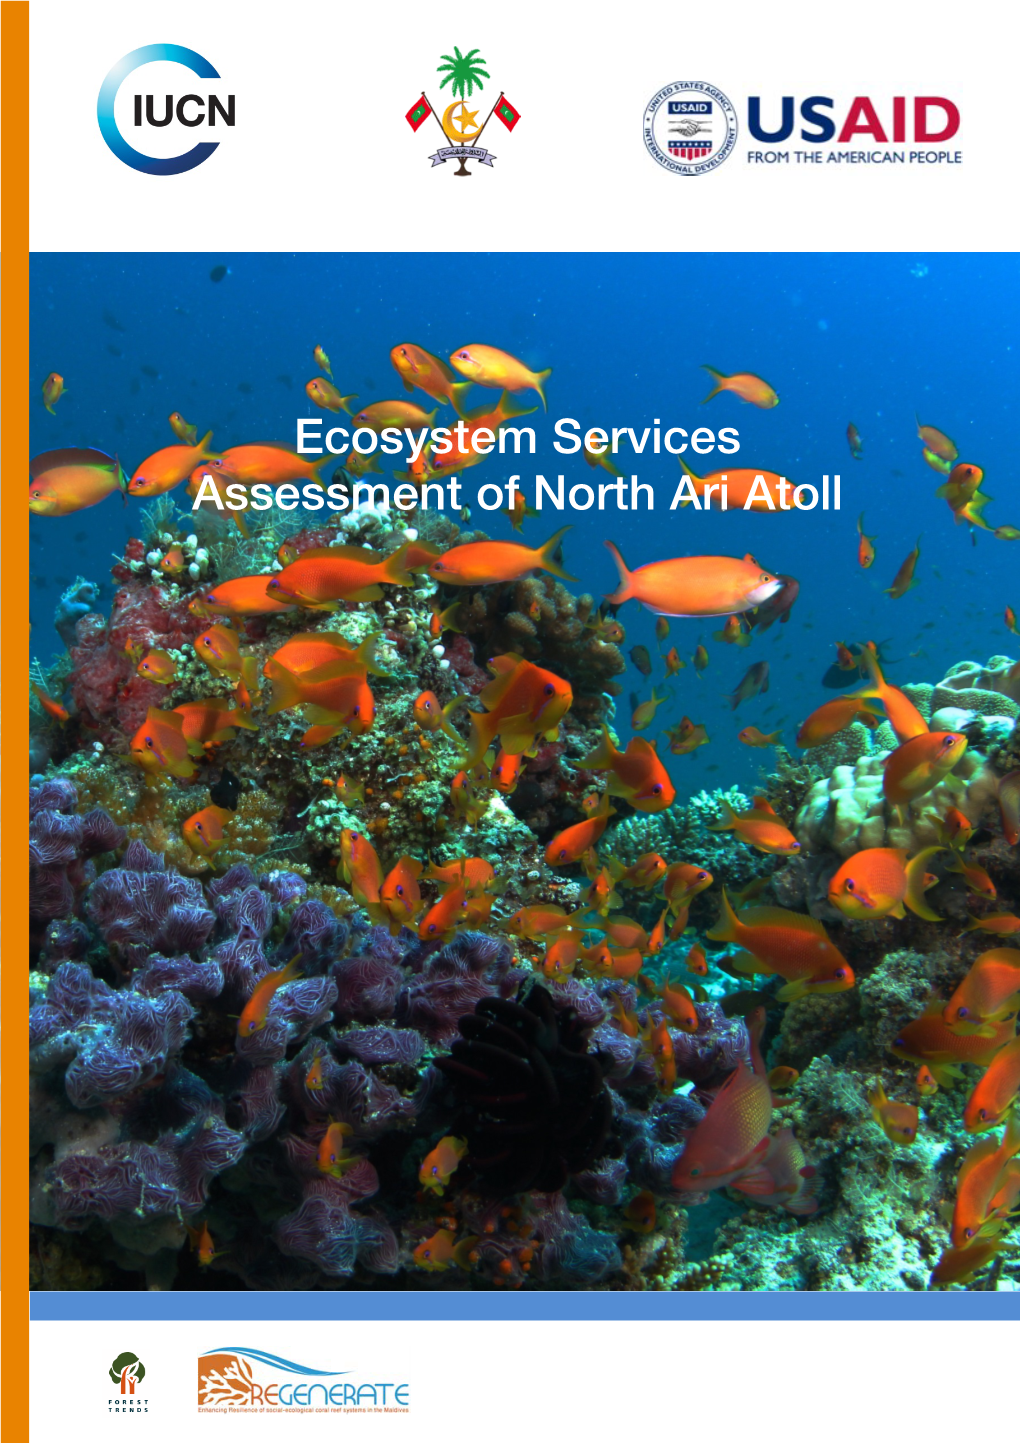 Ecosystem Services Assessment of North Ari Atoll